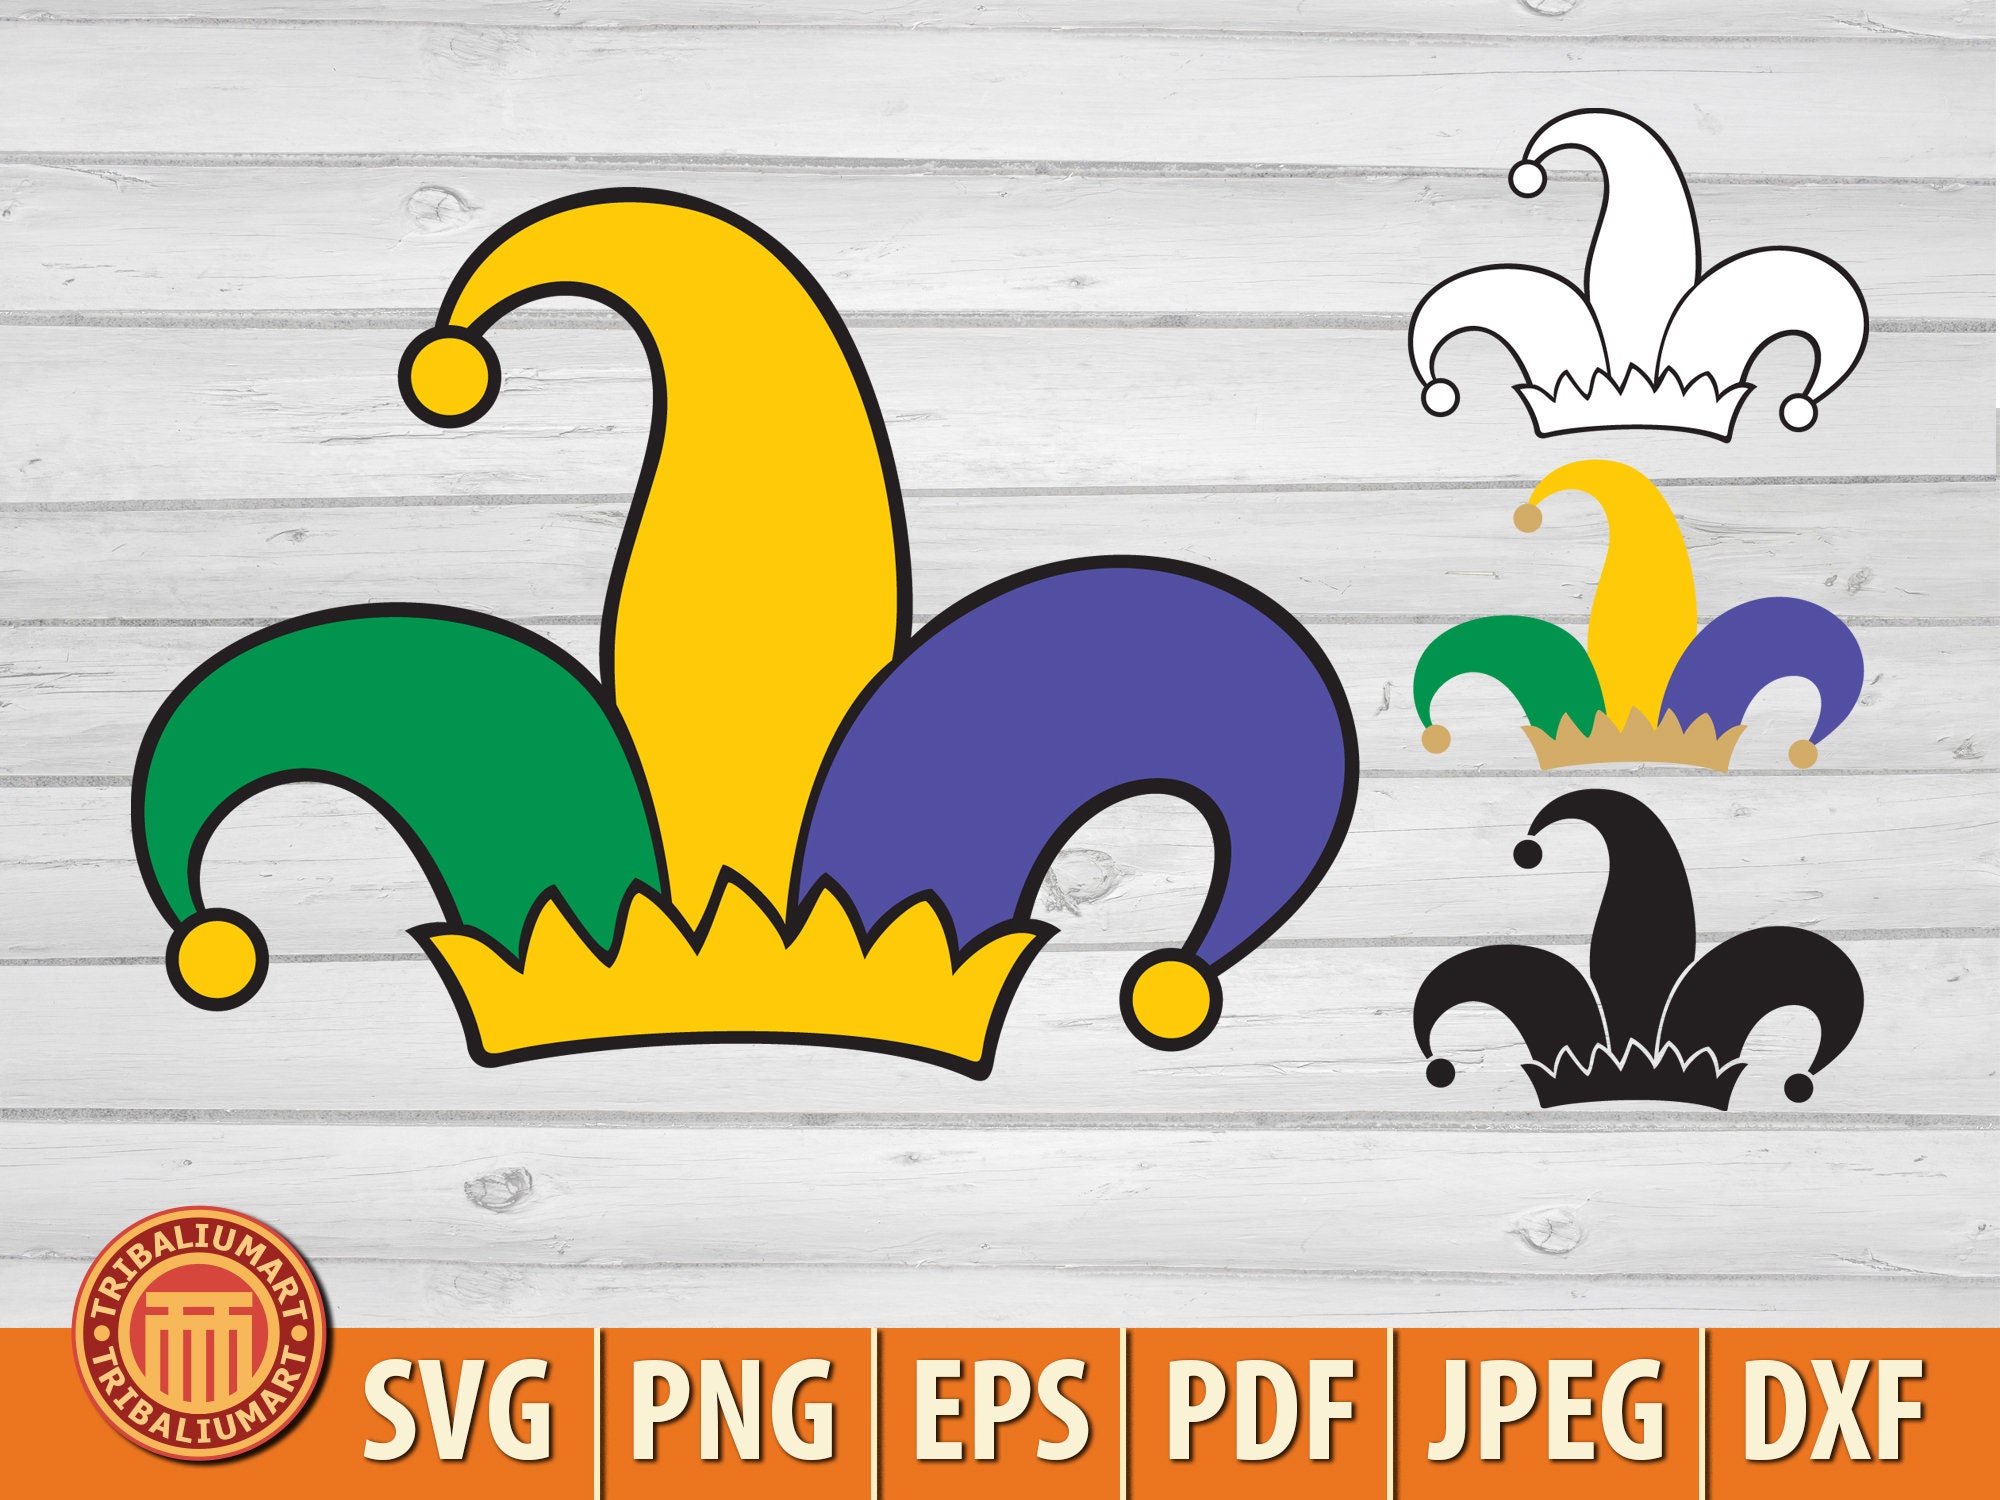 Free Png Jester Png Images Transparent - Jester Devil May Cry 3 Art  Clipart, transparent png image